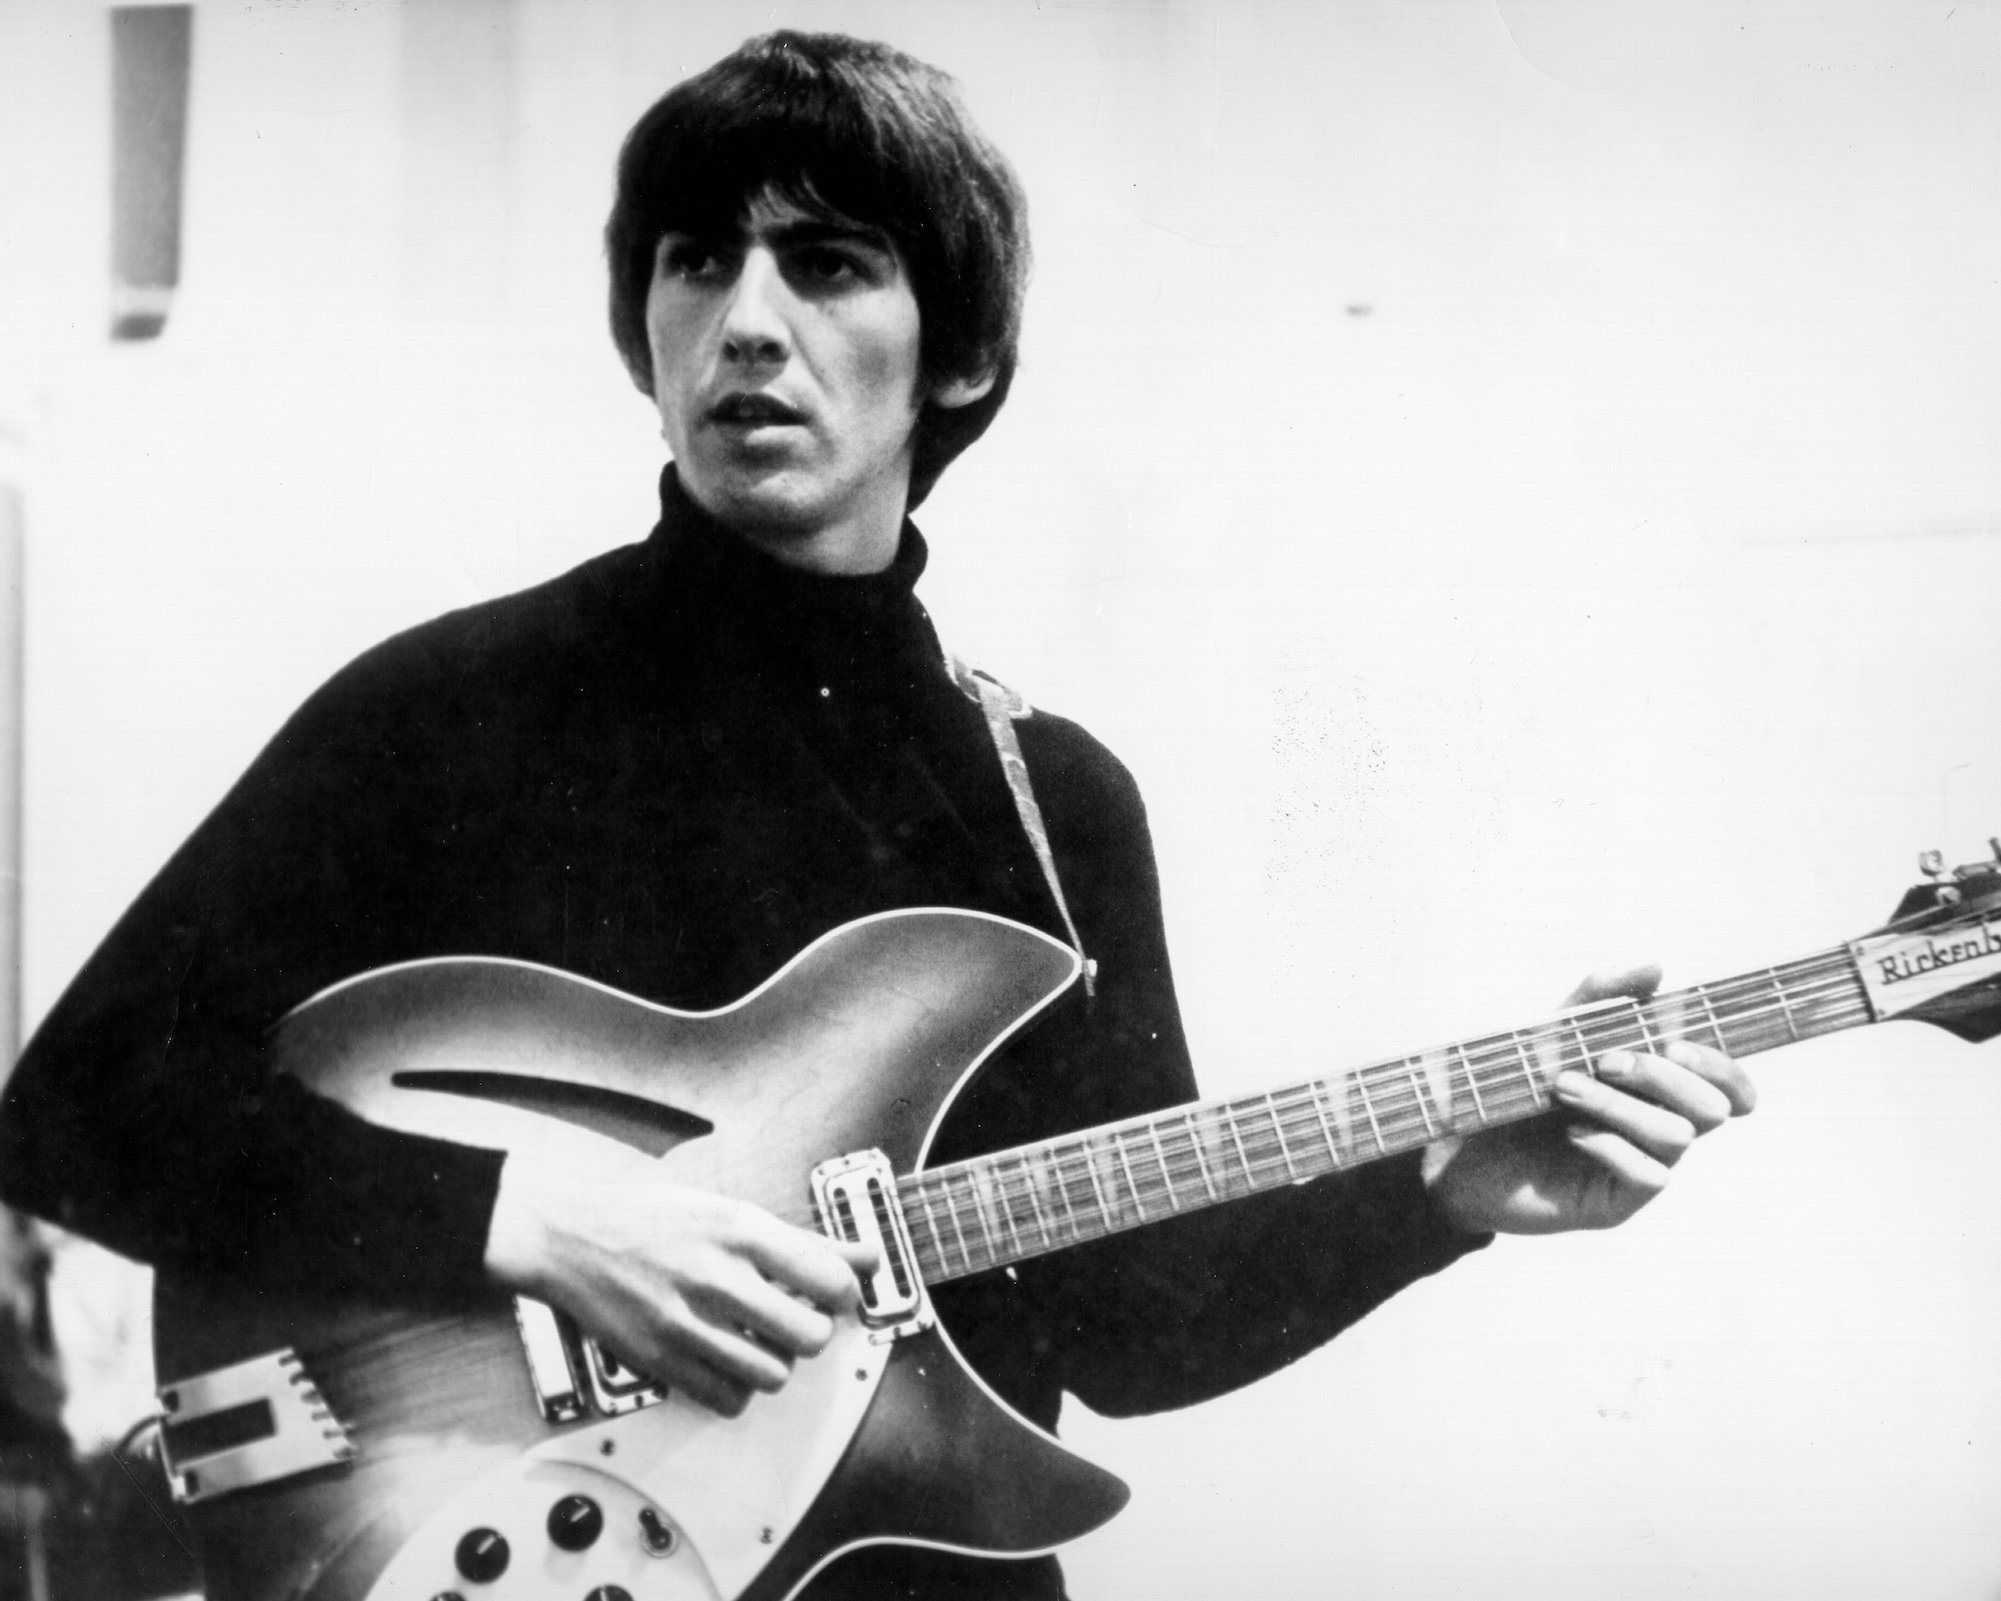 George Harrison records with The Beatles in 1965